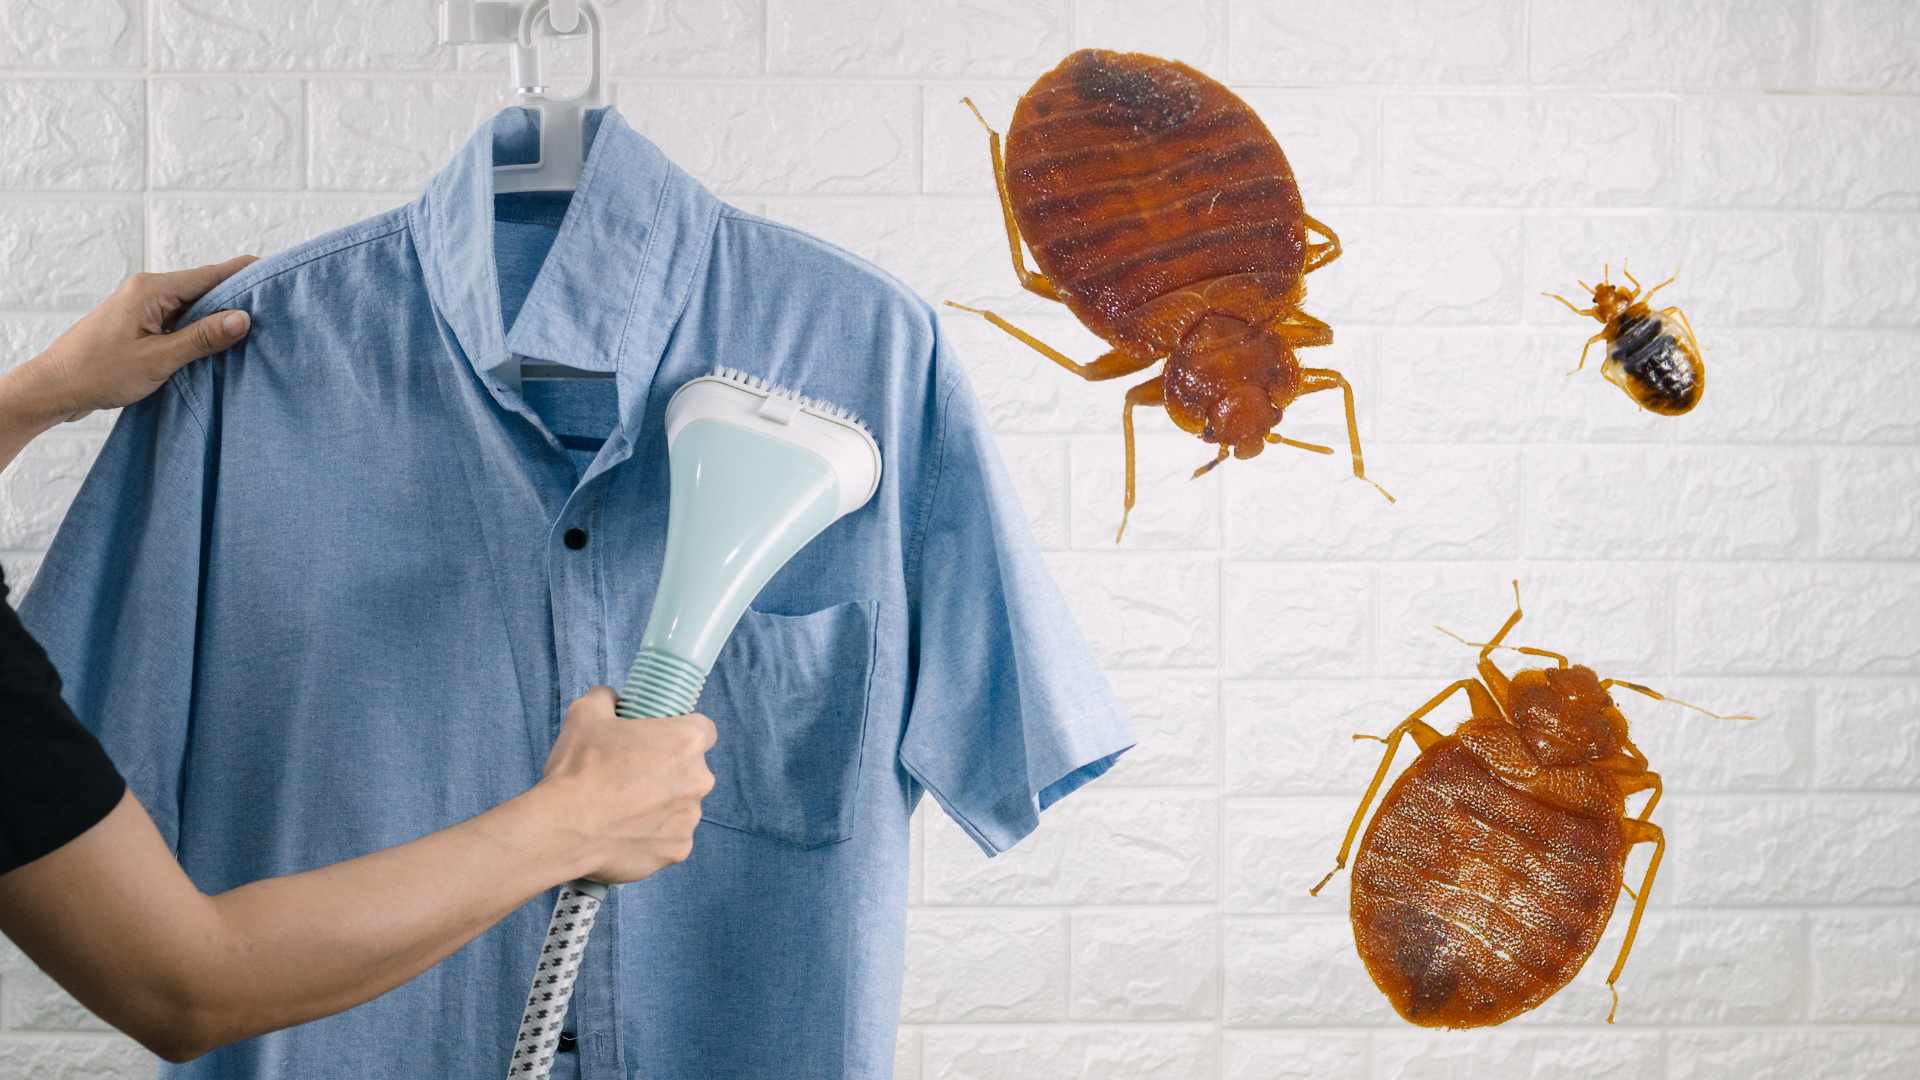 Can a Clothes Steamer Kill Bed Bugs?